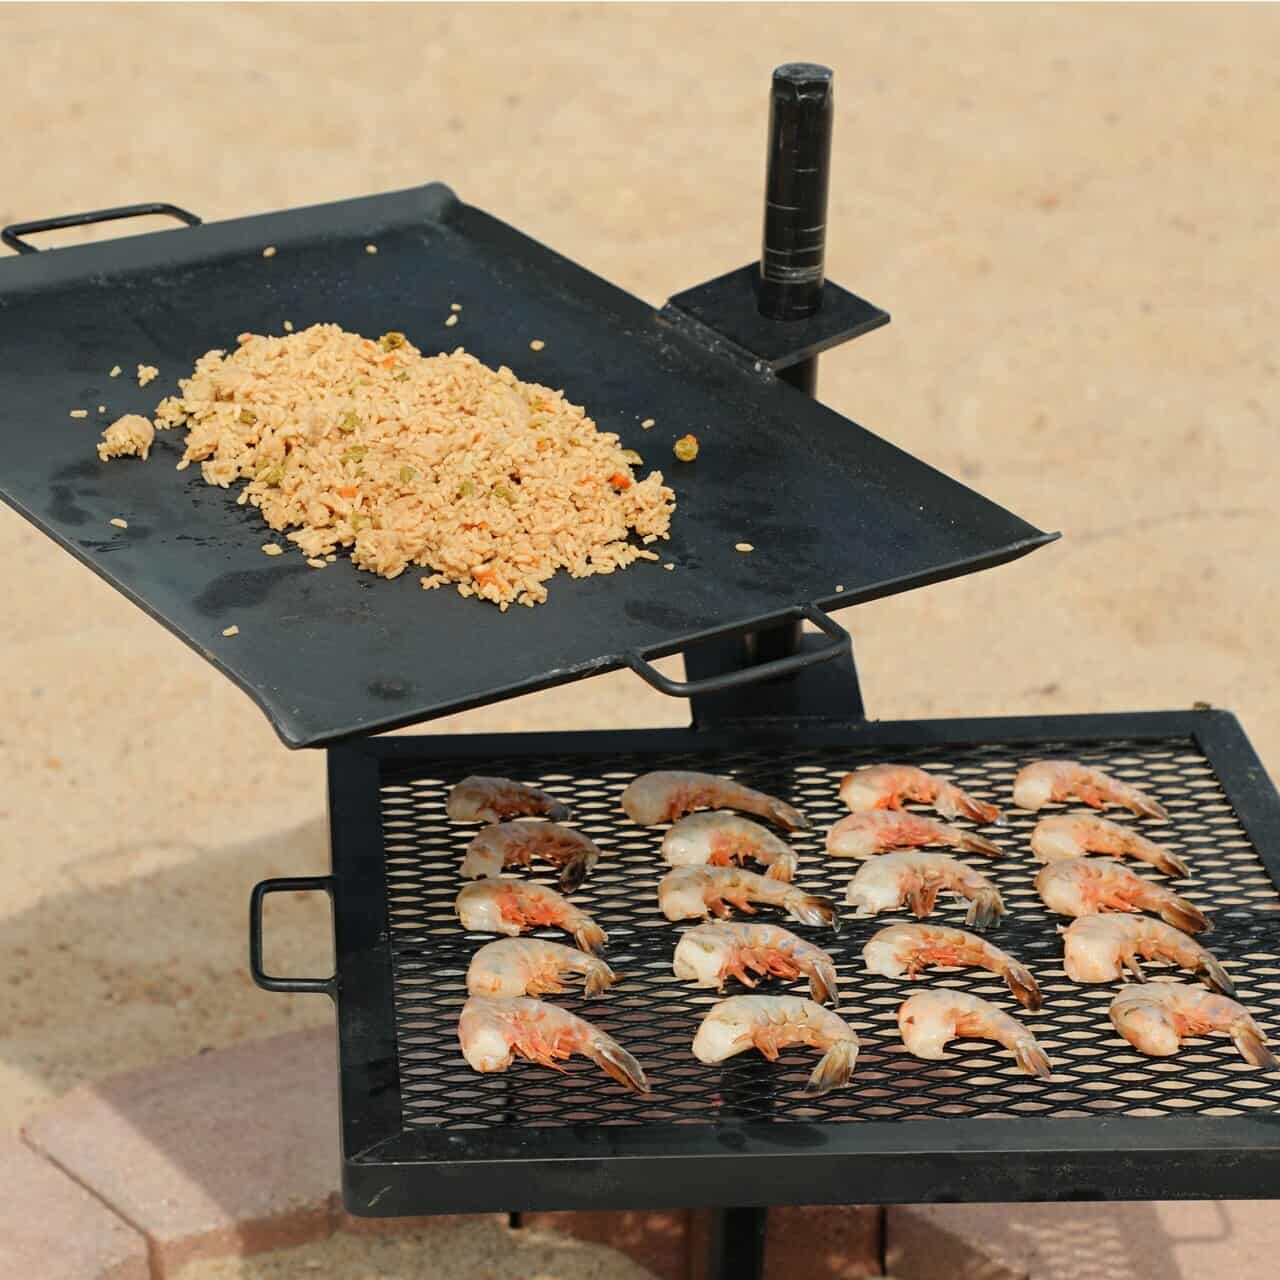 Details about   GameMaker GG-1318 Heavy Duty Gravity Combo Open Fire Camping Grill and Griddle 